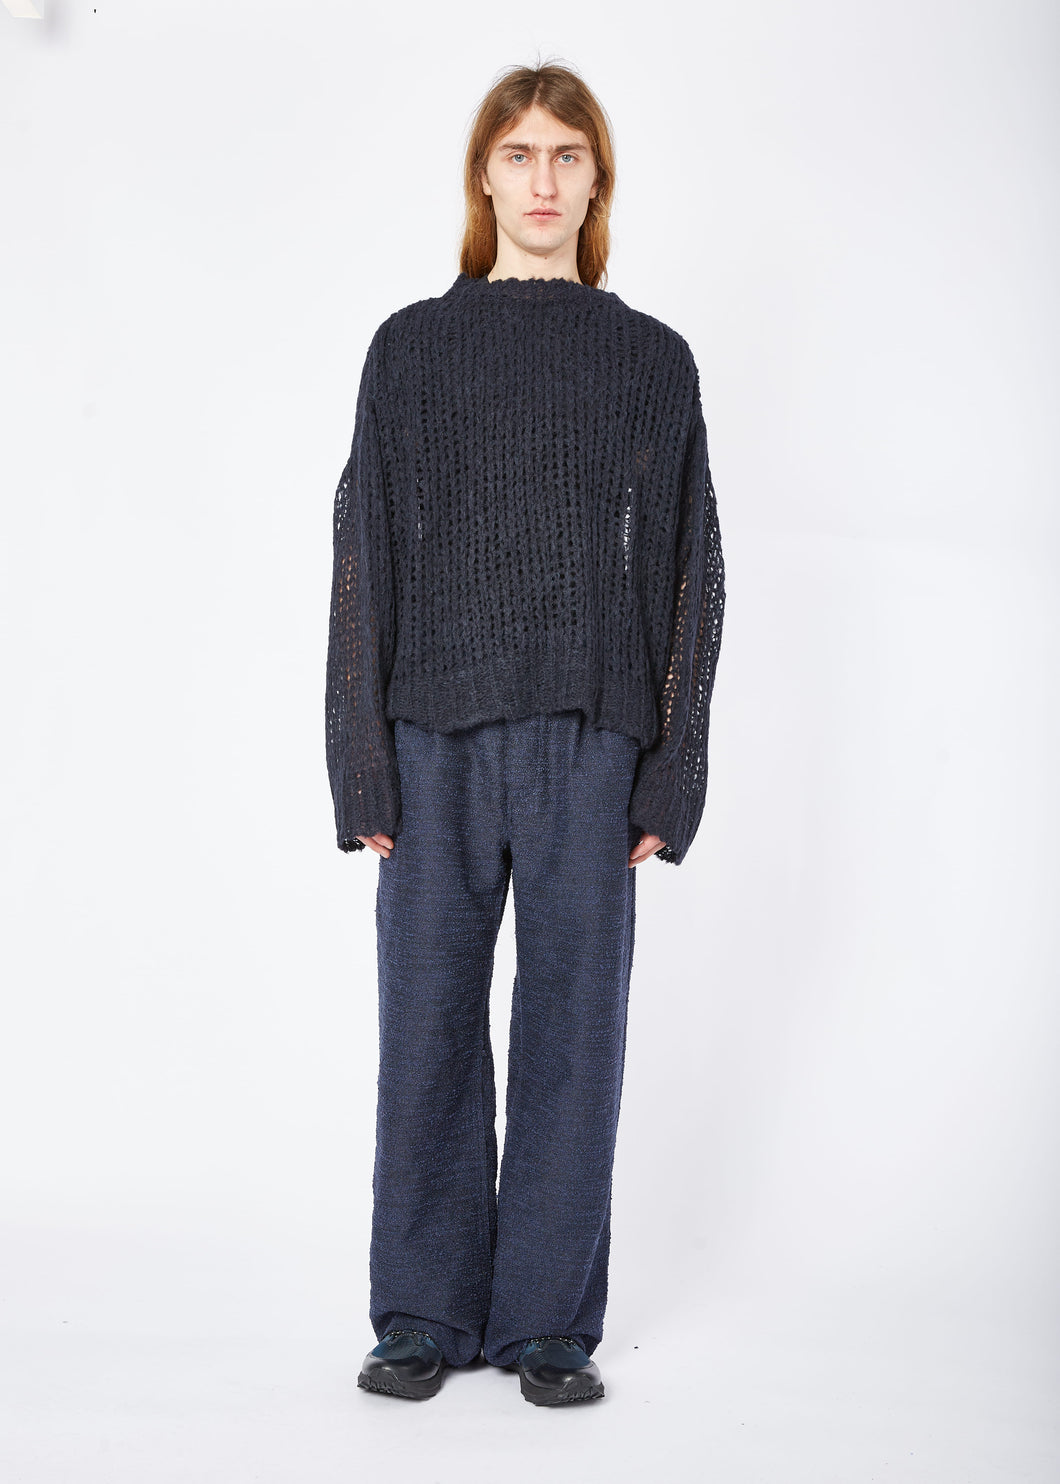 AIREI Knit Sweater (Onyx) – COWBOYS to CATWALK